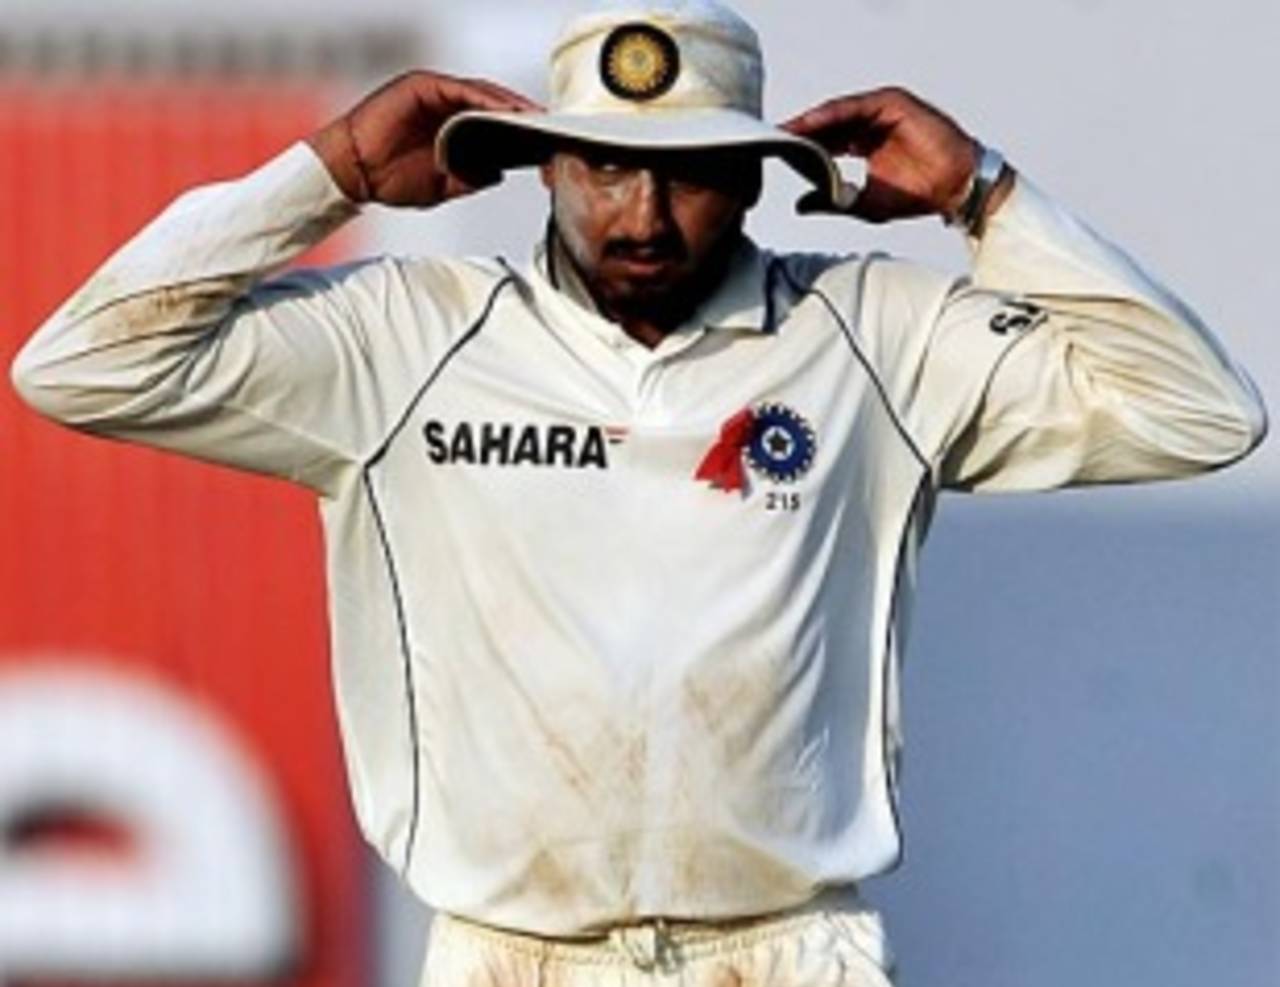 Harbhajan Singh finished the first day with 4 for 107, India v Sri Lanka, 3rd Test, Mumbai, 1st day, December 2, 2009